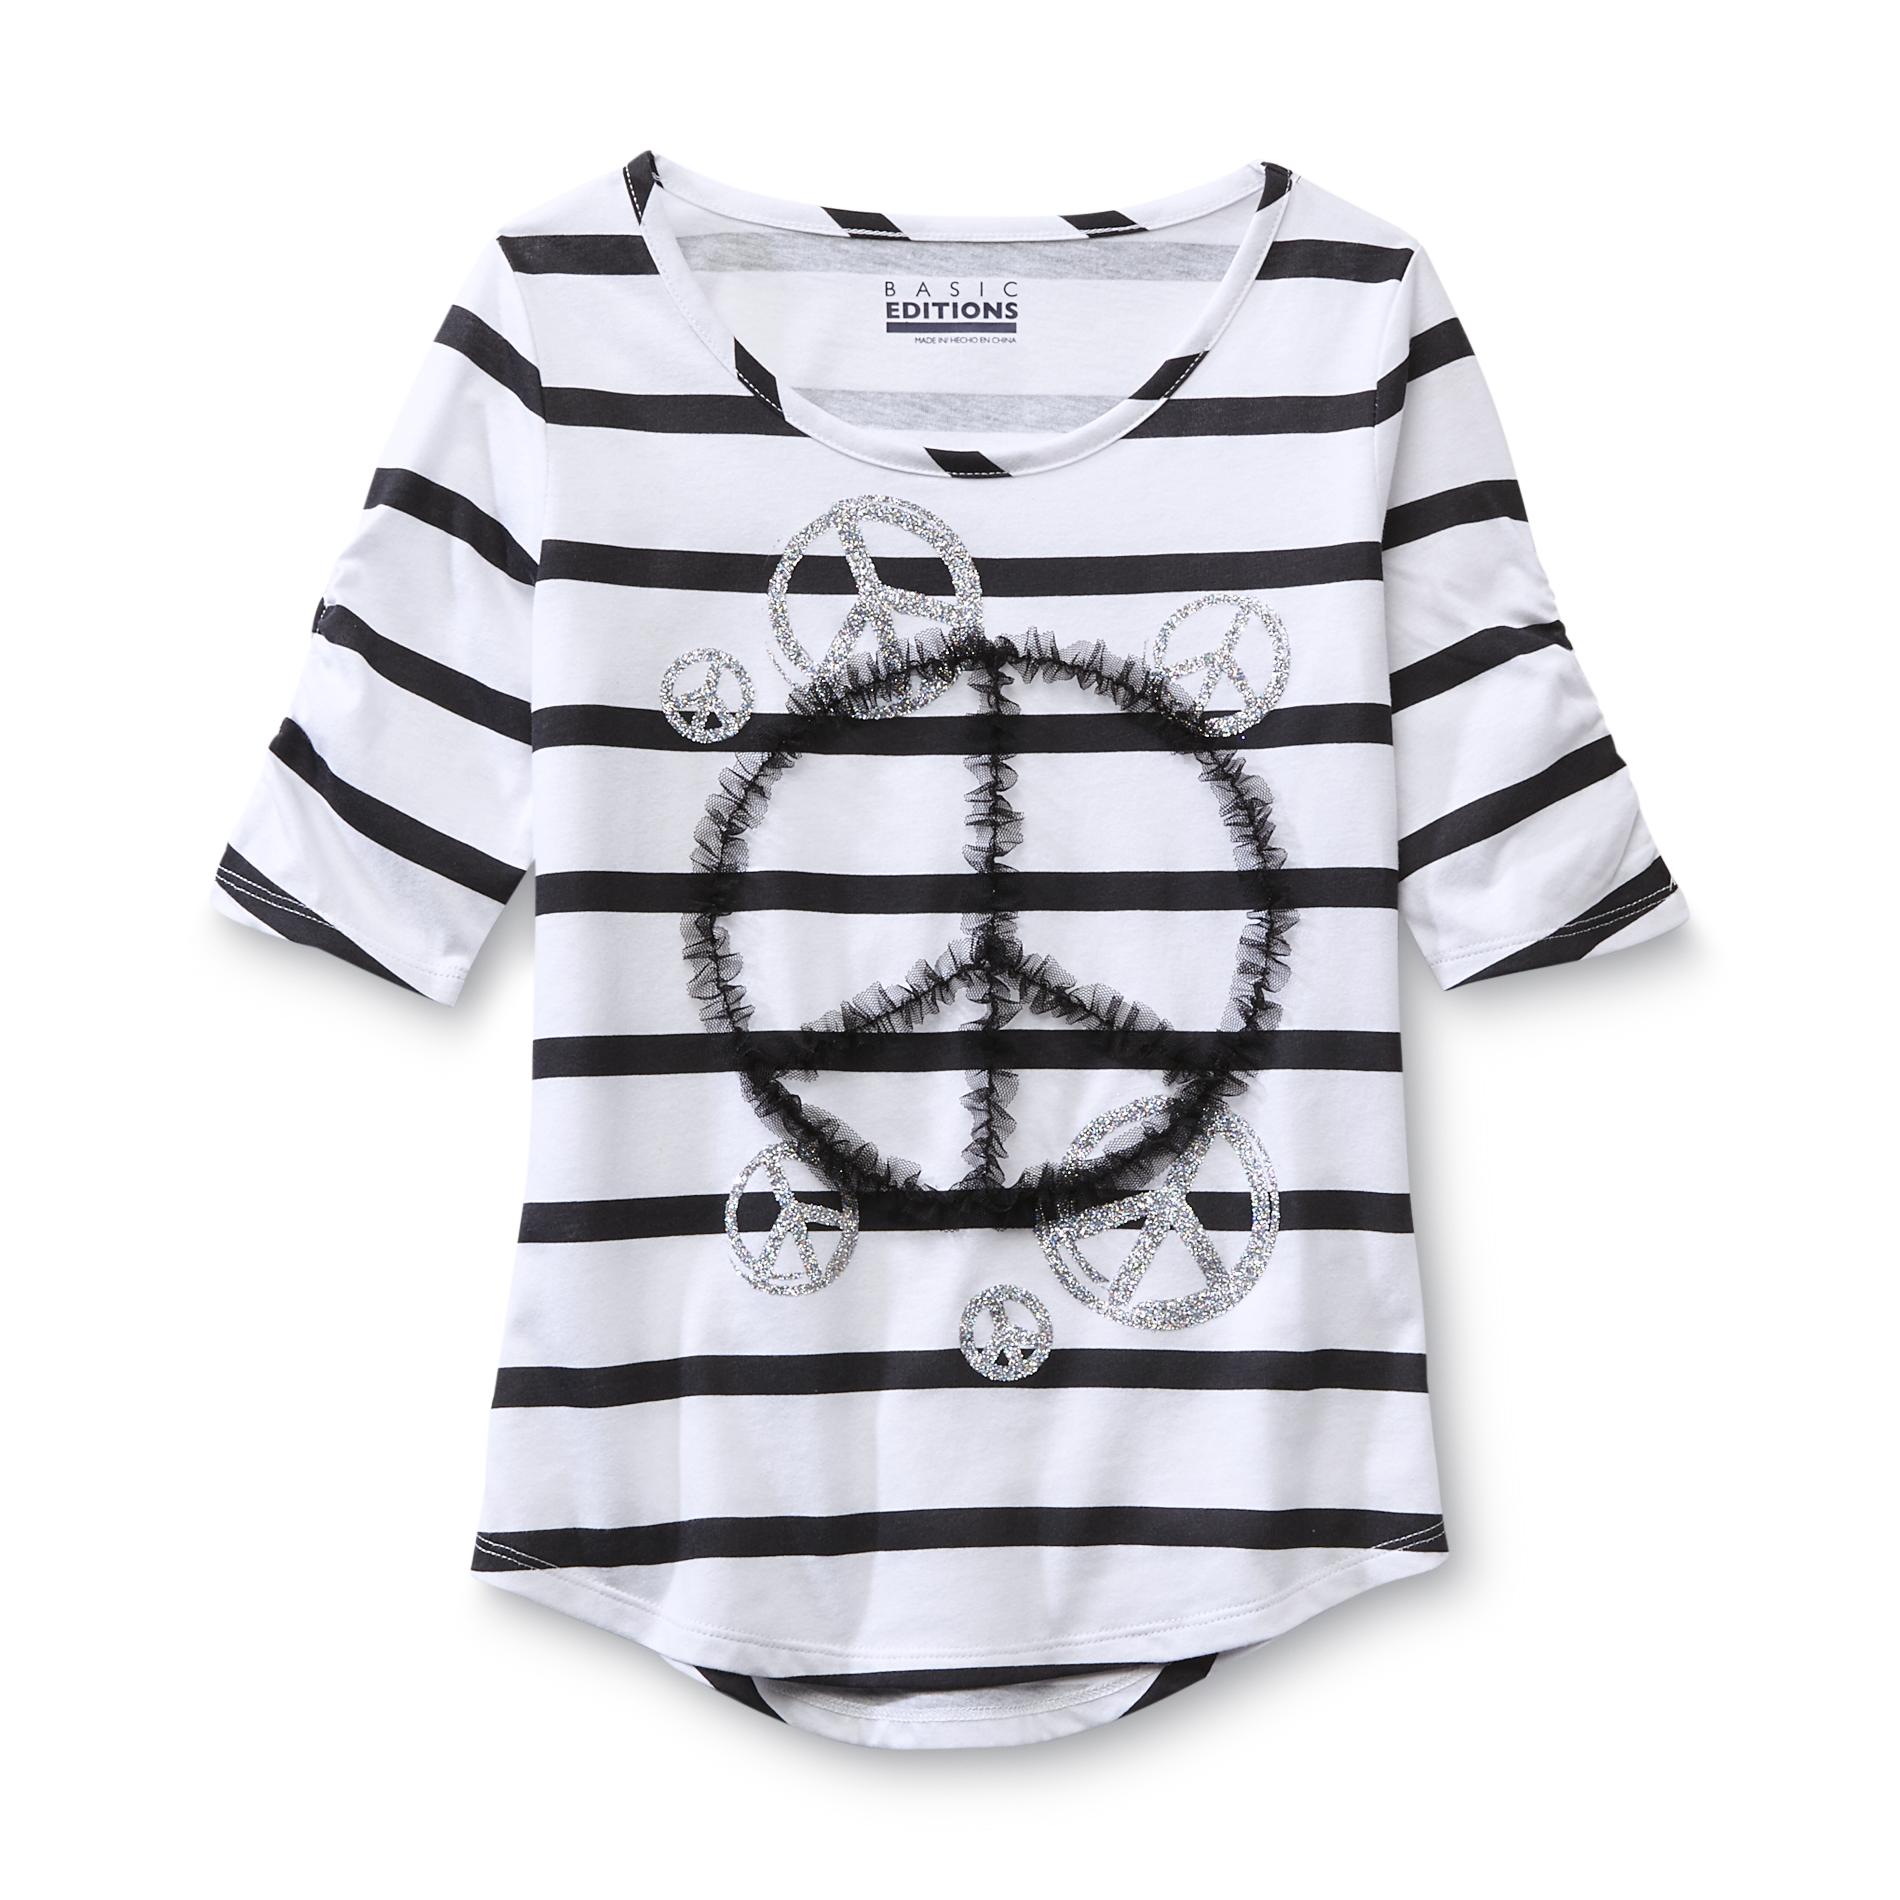 Basic Editions Girl's Three-Quarter-Sleeve Top - Peace Signs